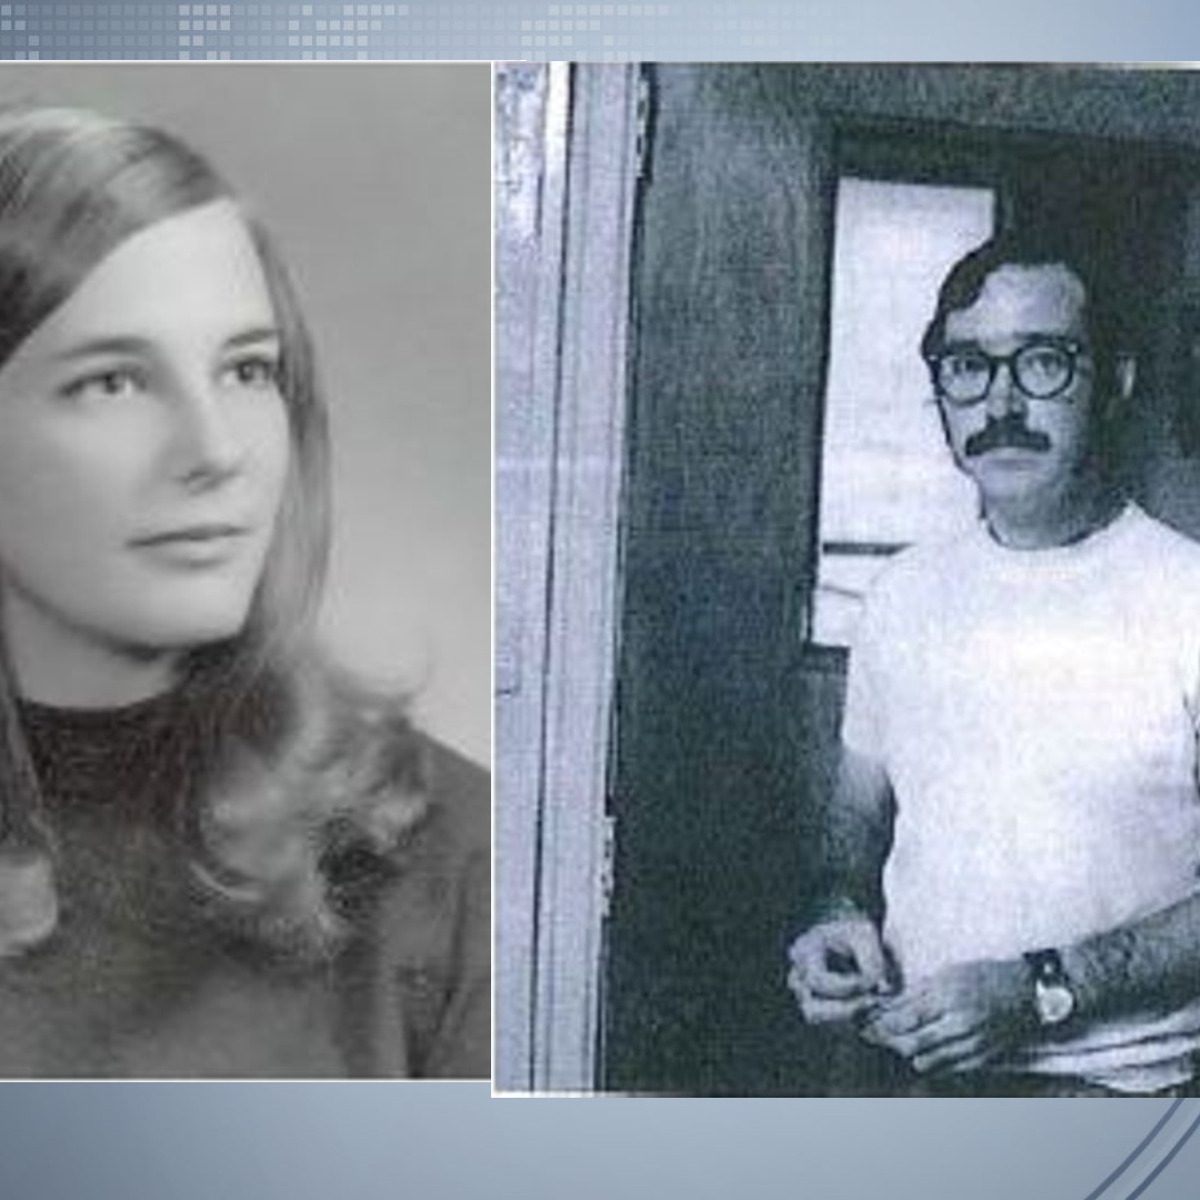 [IMAGE] Iowa cold case linked to murdered West Frankfort man